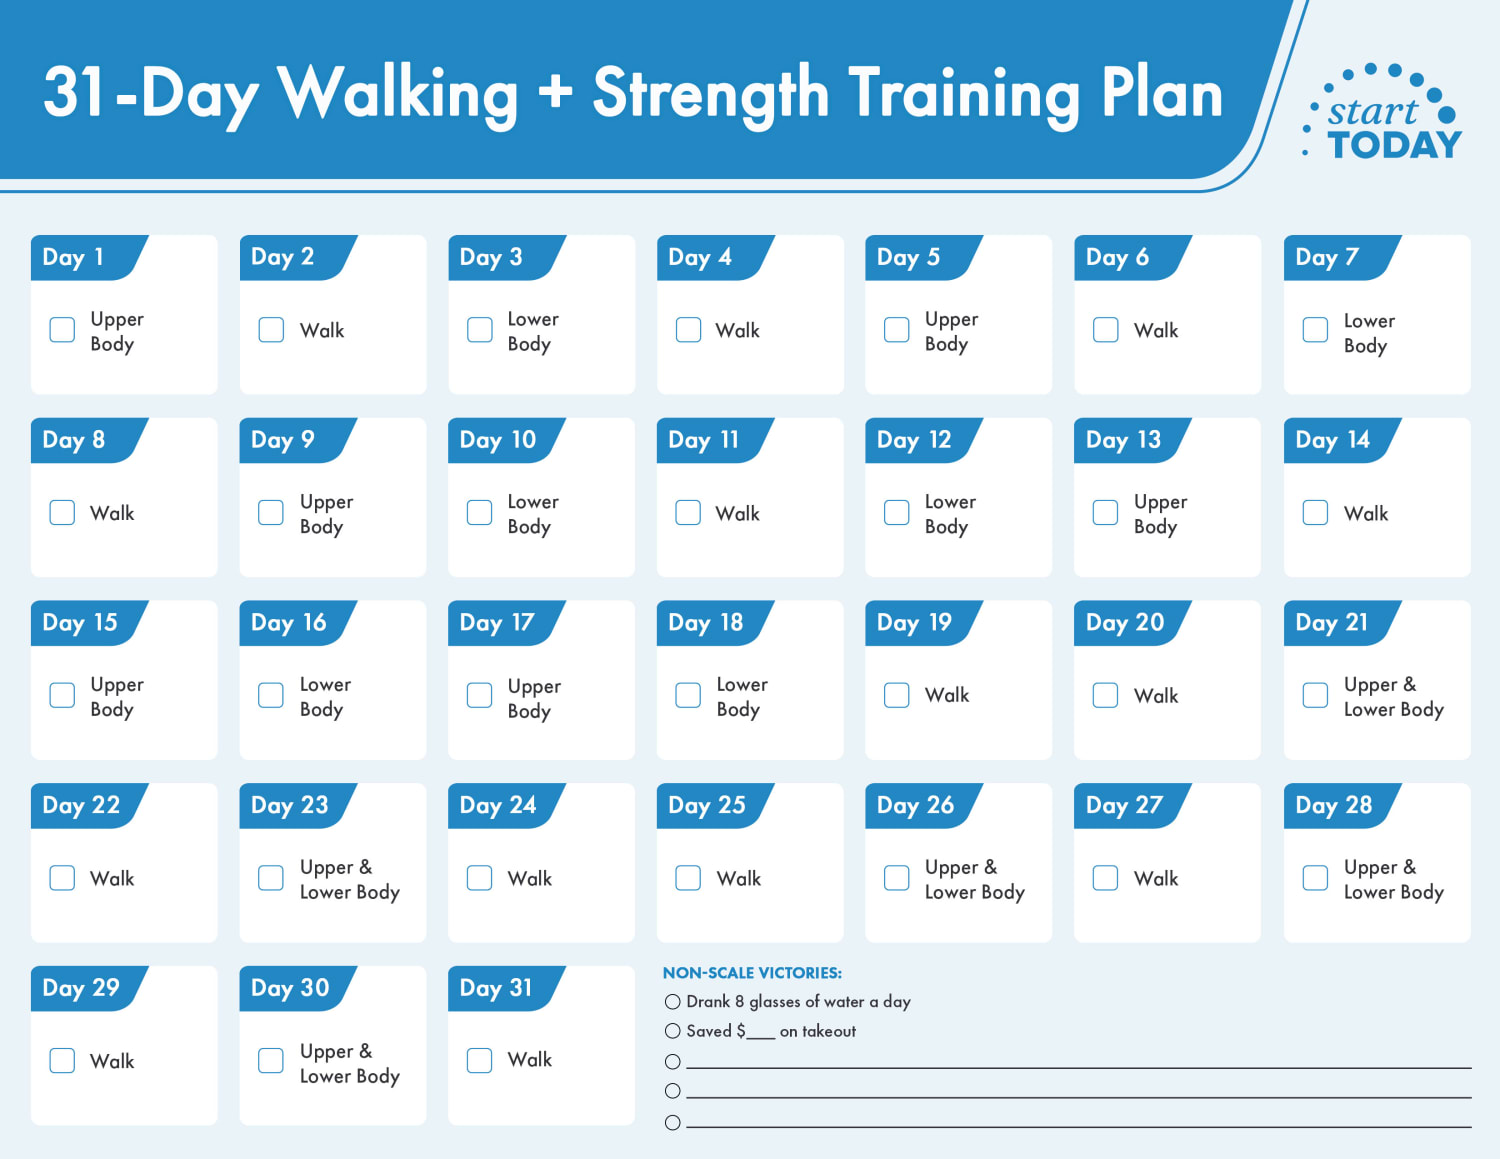 A 31-day Walking and Strength Training Workout for Beginners